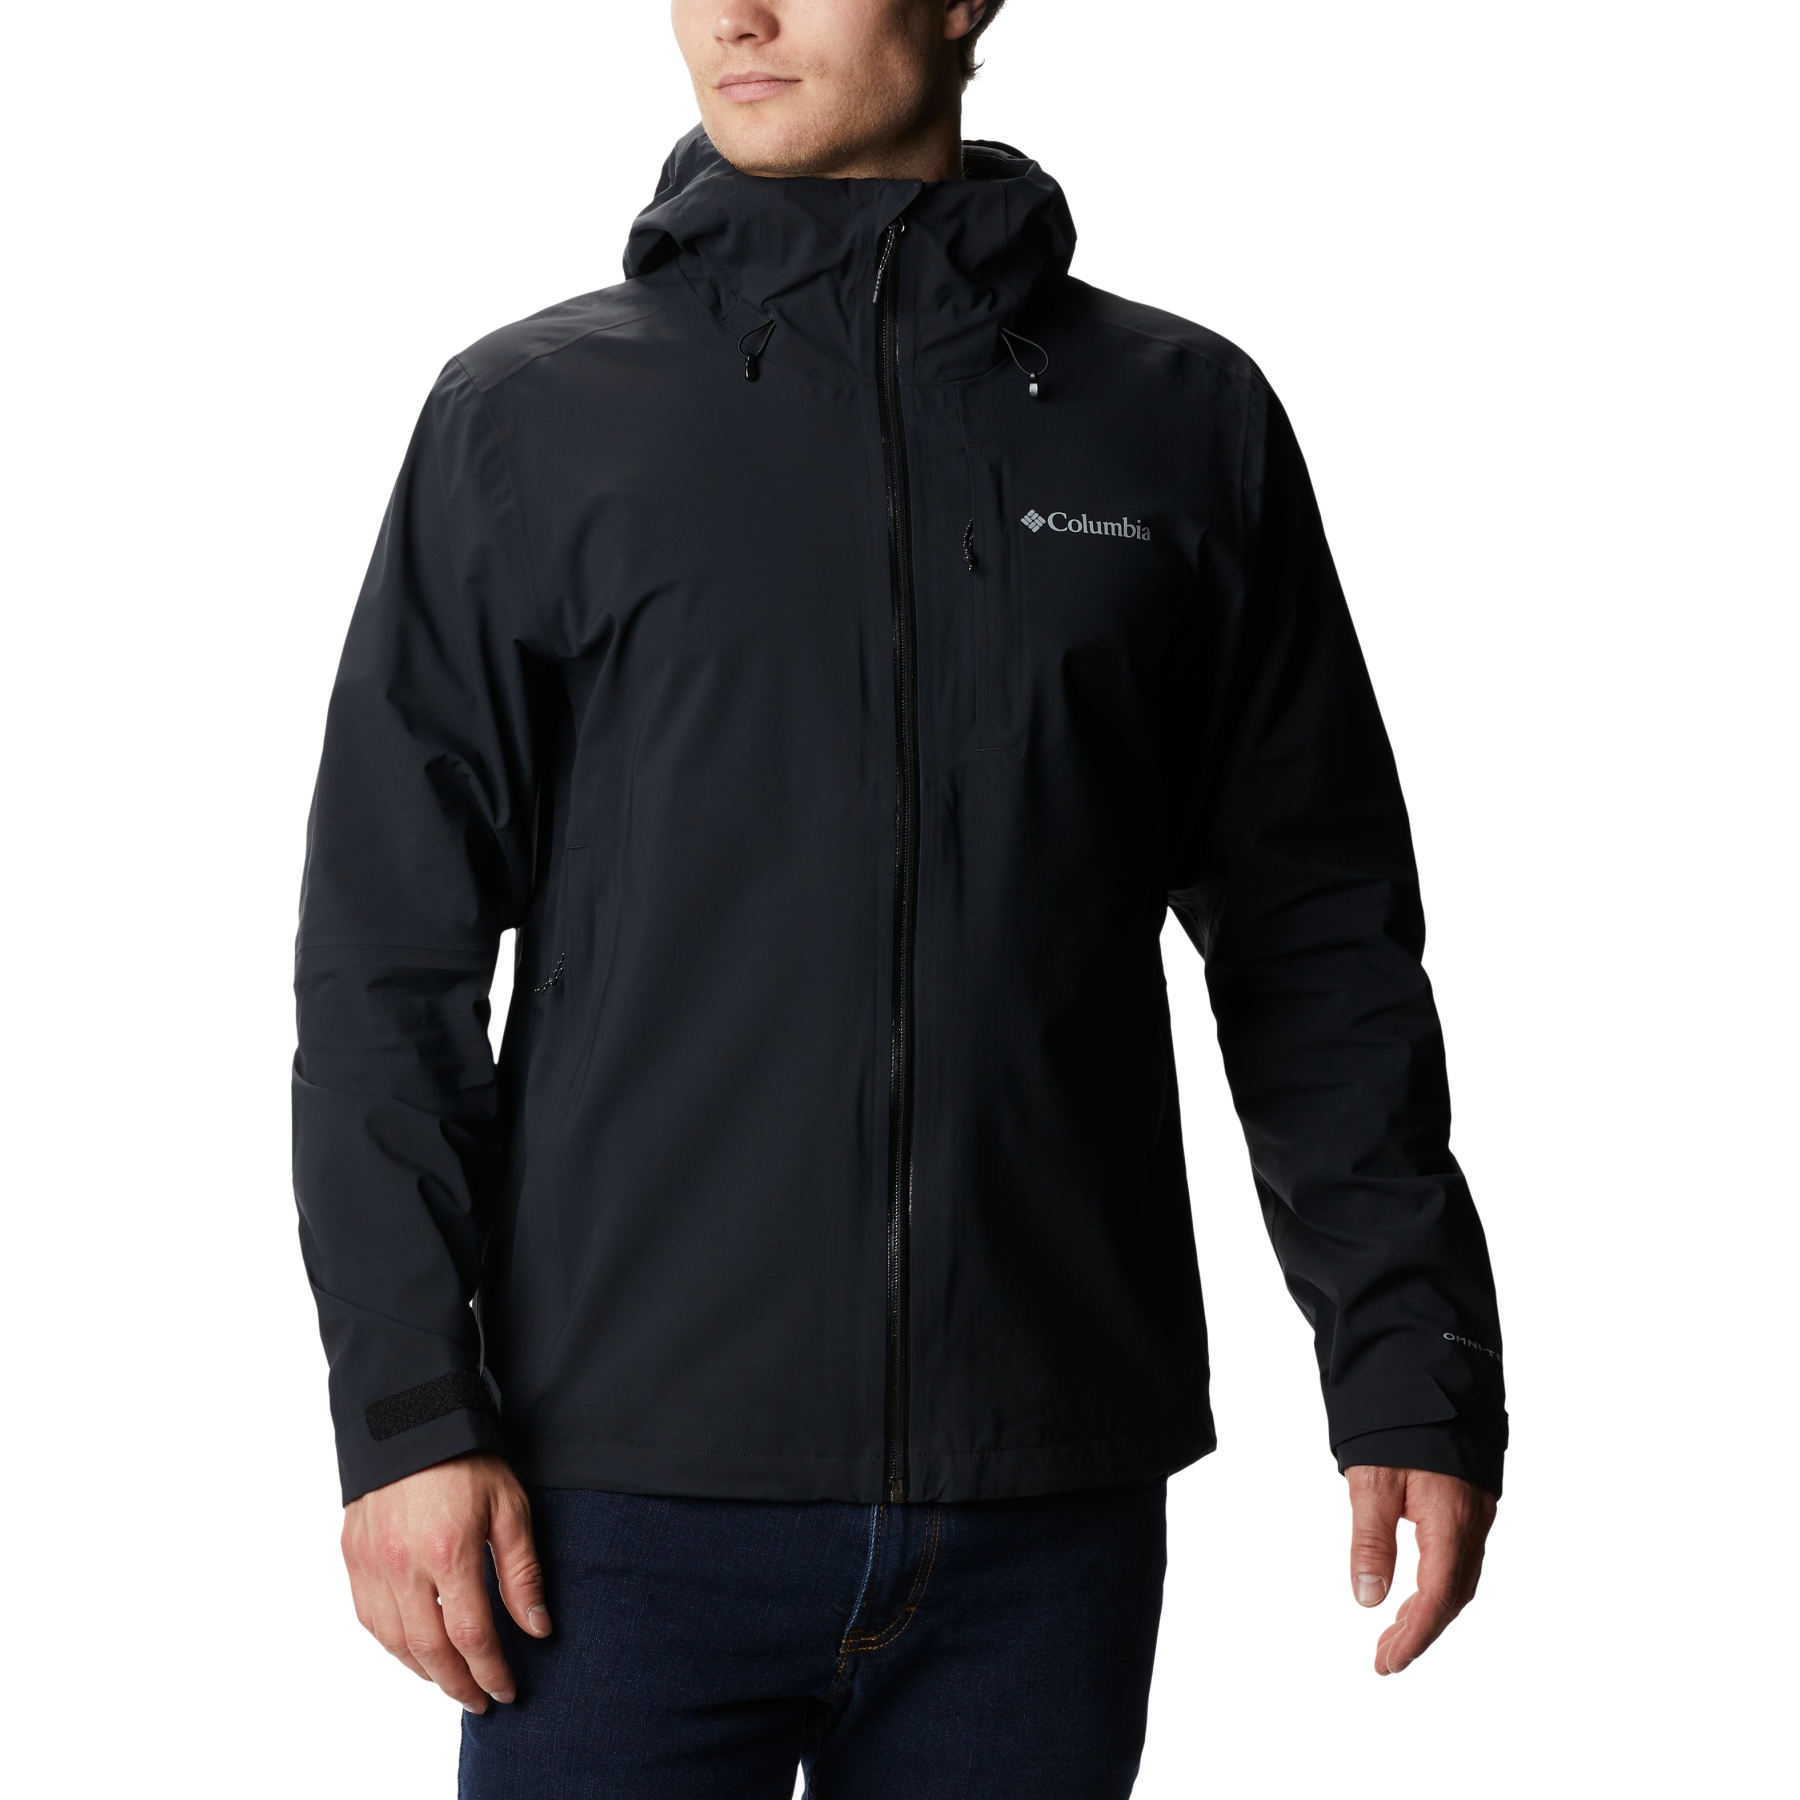 Picture of Columbia Omni-Tech Ampli-Dry Shell Jacket - Black